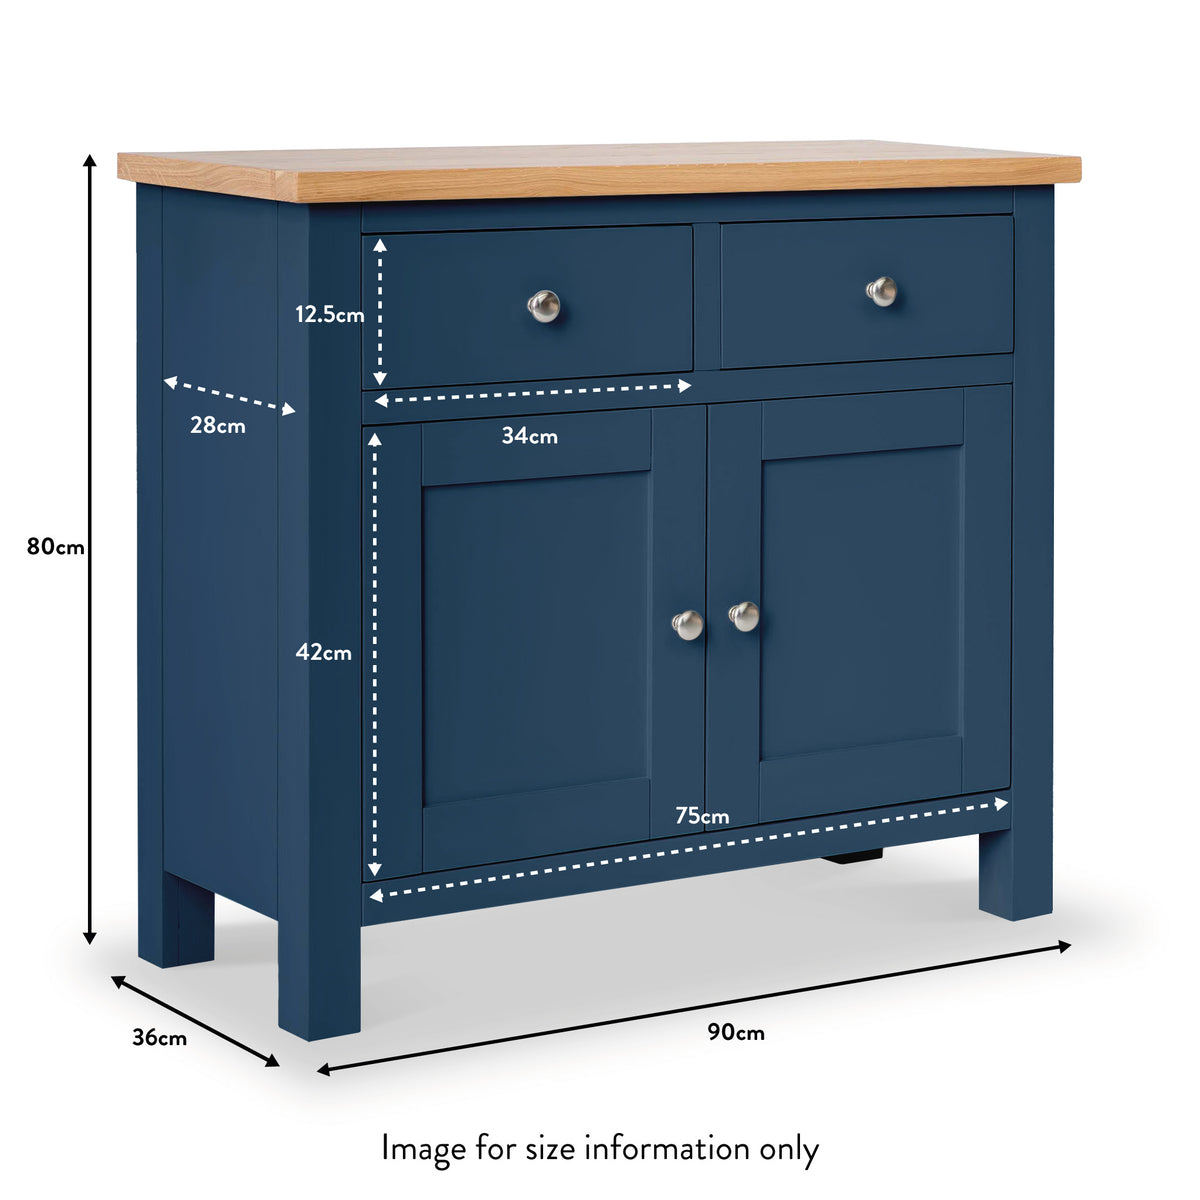 Farrow Small Sideboard Cabinet dimensions